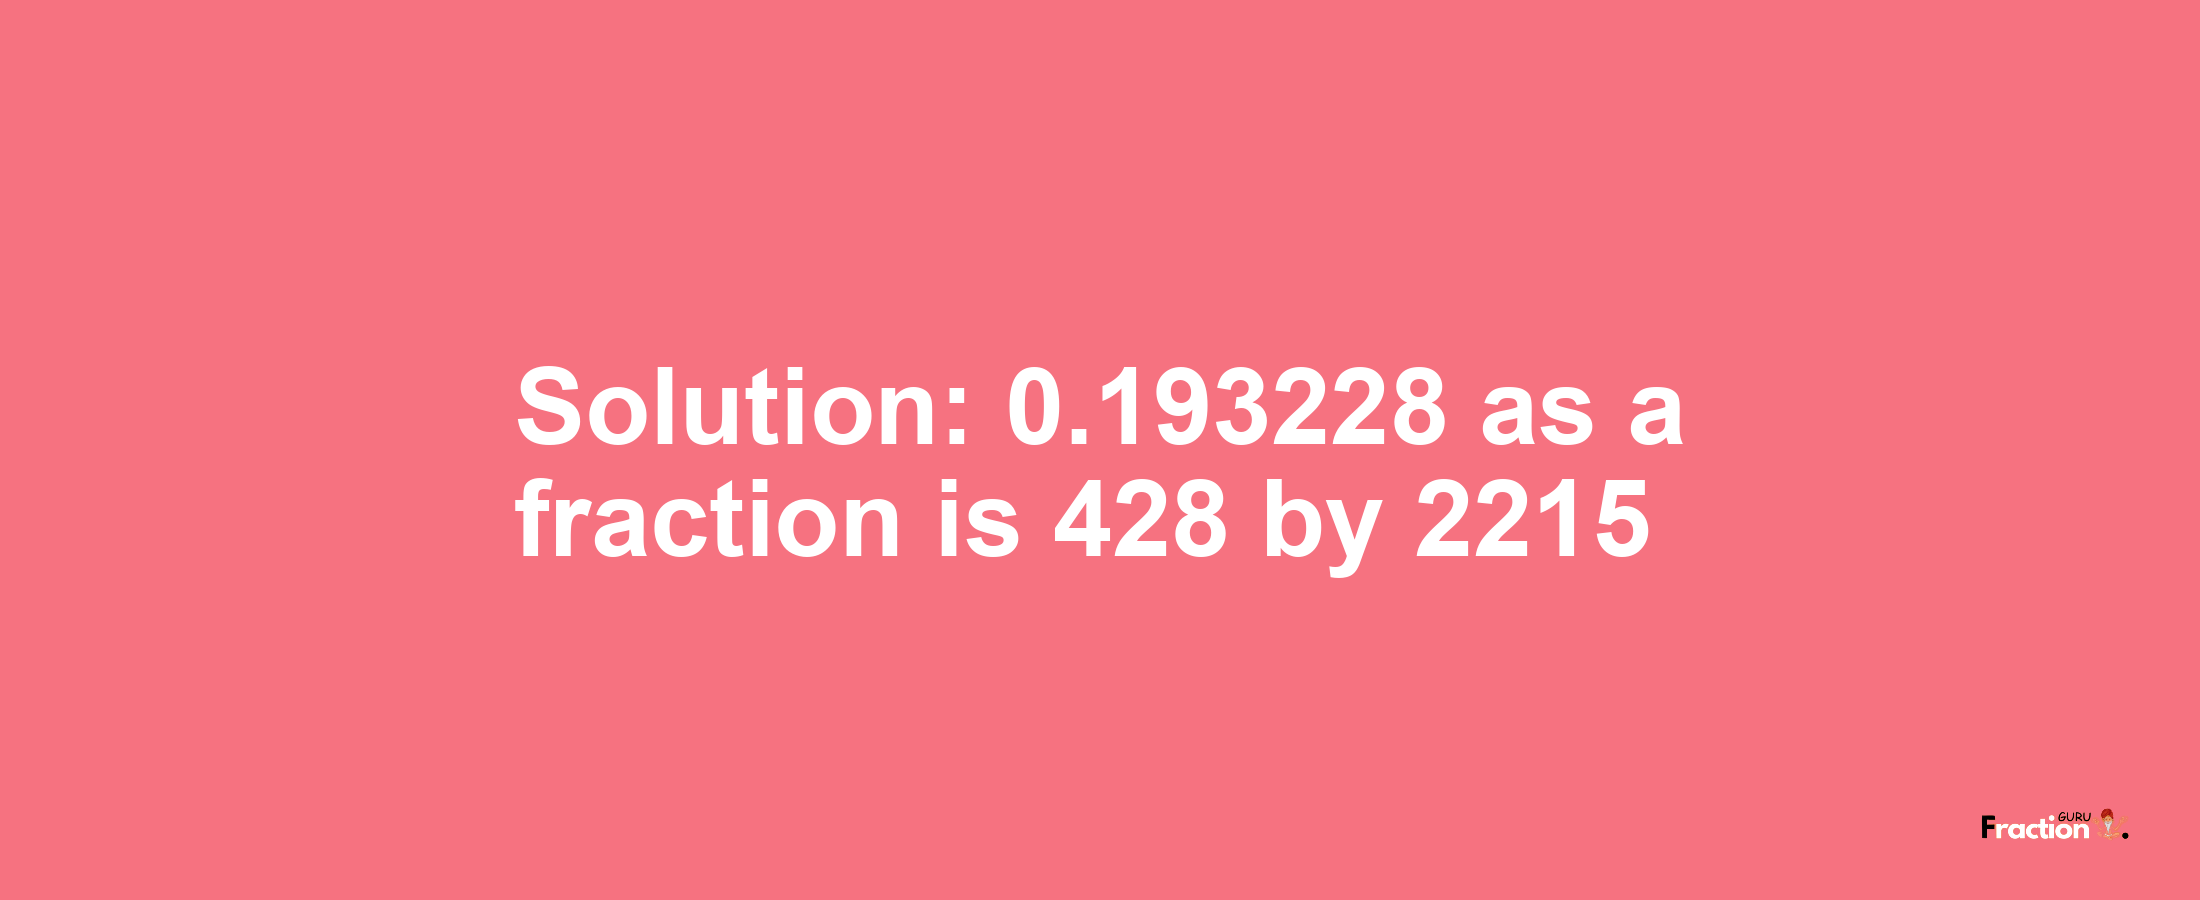 Solution:0.193228 as a fraction is 428/2215